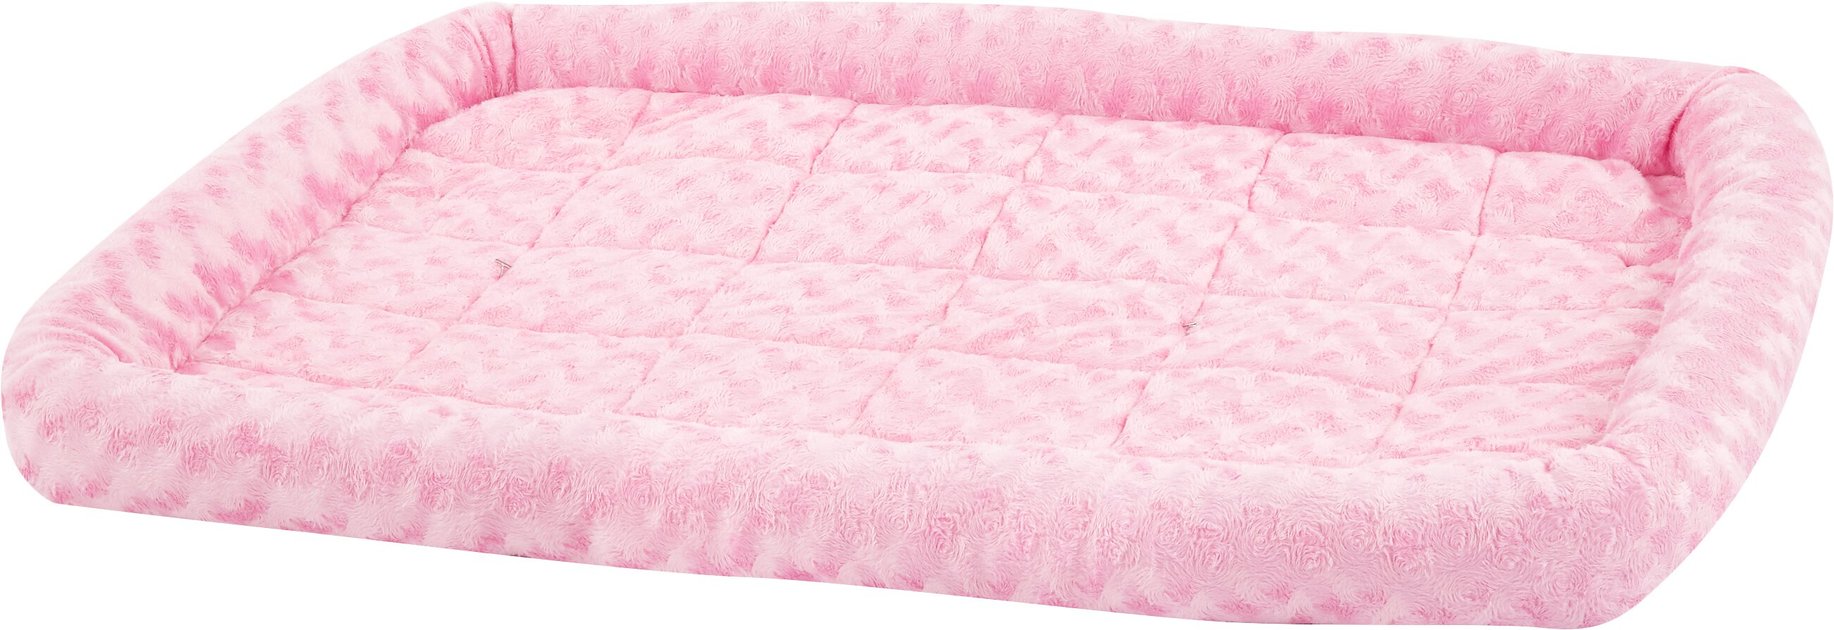 MIDWEST Quiet Time Fashion Plush Bolster Dog Crate Mat, Pink, 30-in - Chewy...